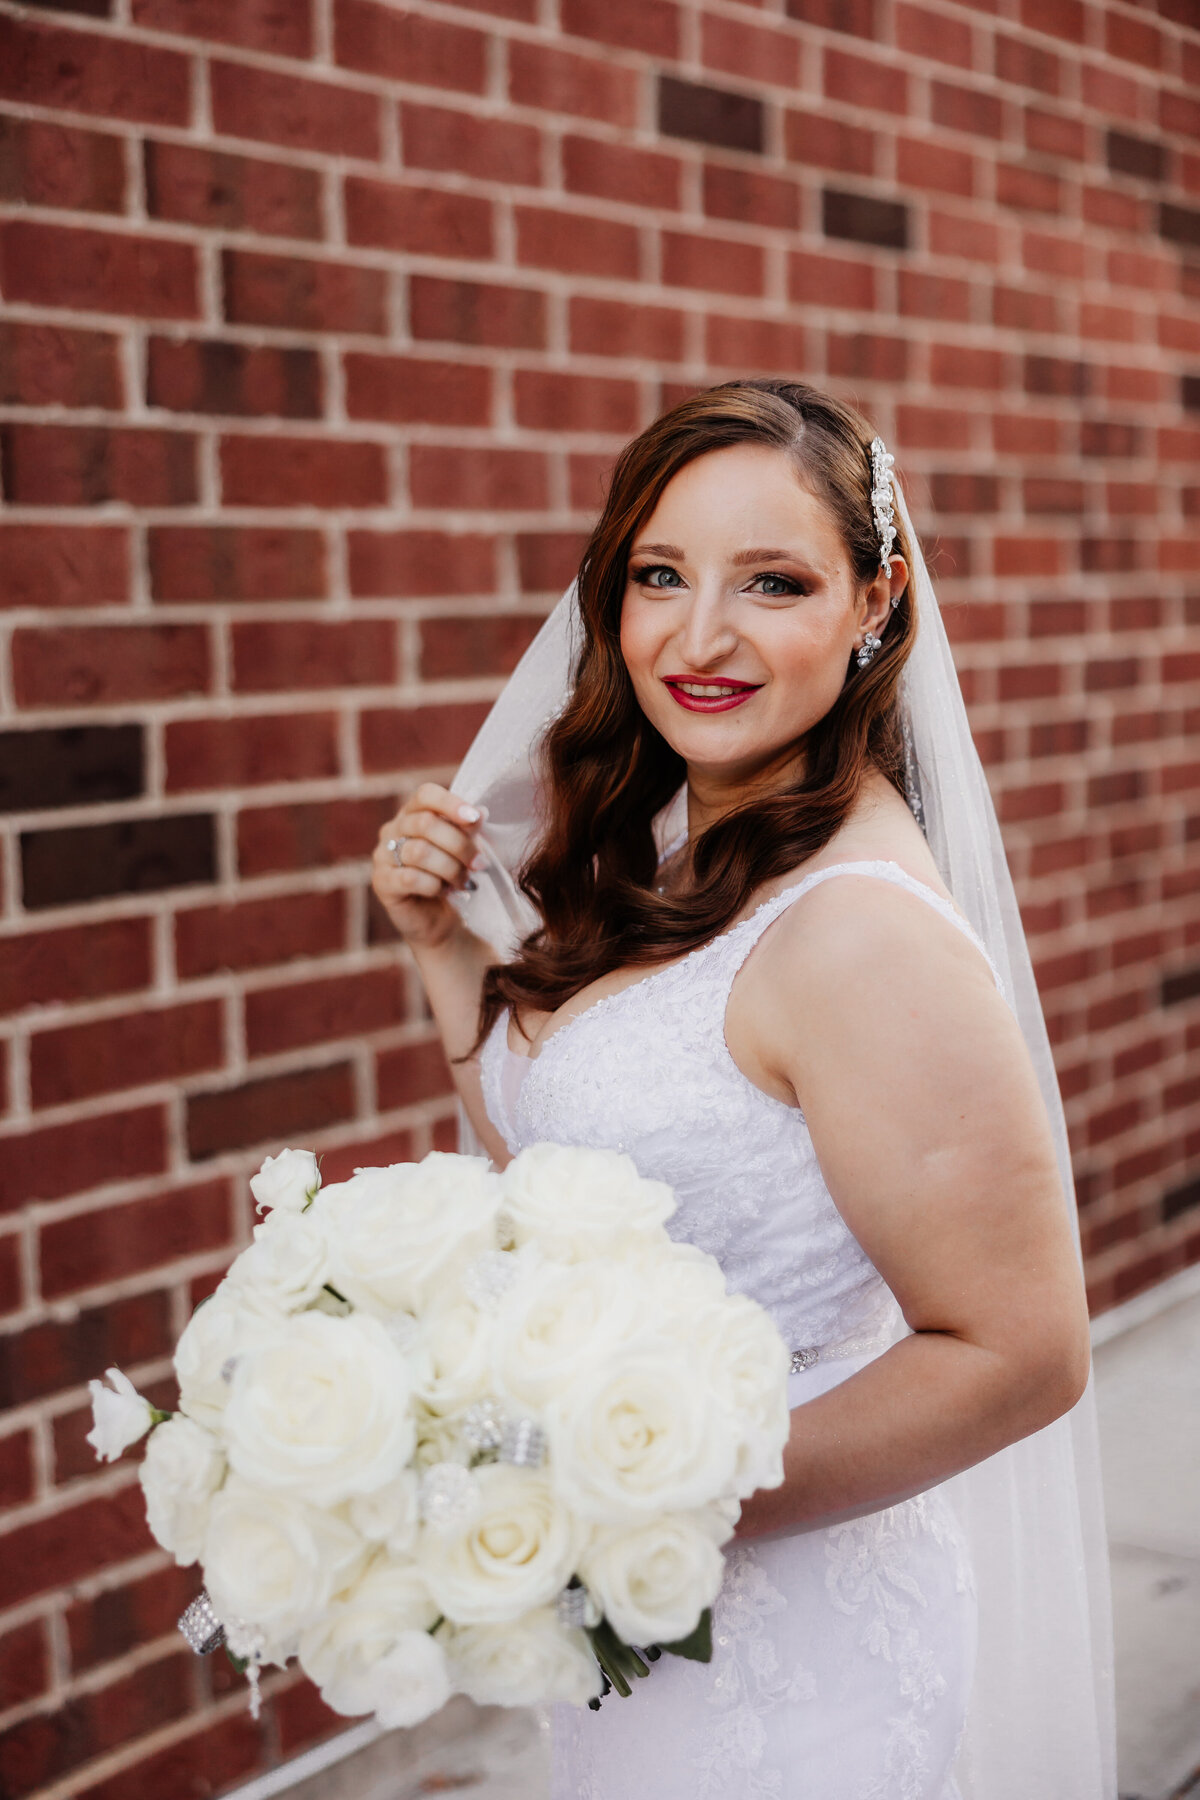 A bride holds her veil for a portrait in front of  brick wall.